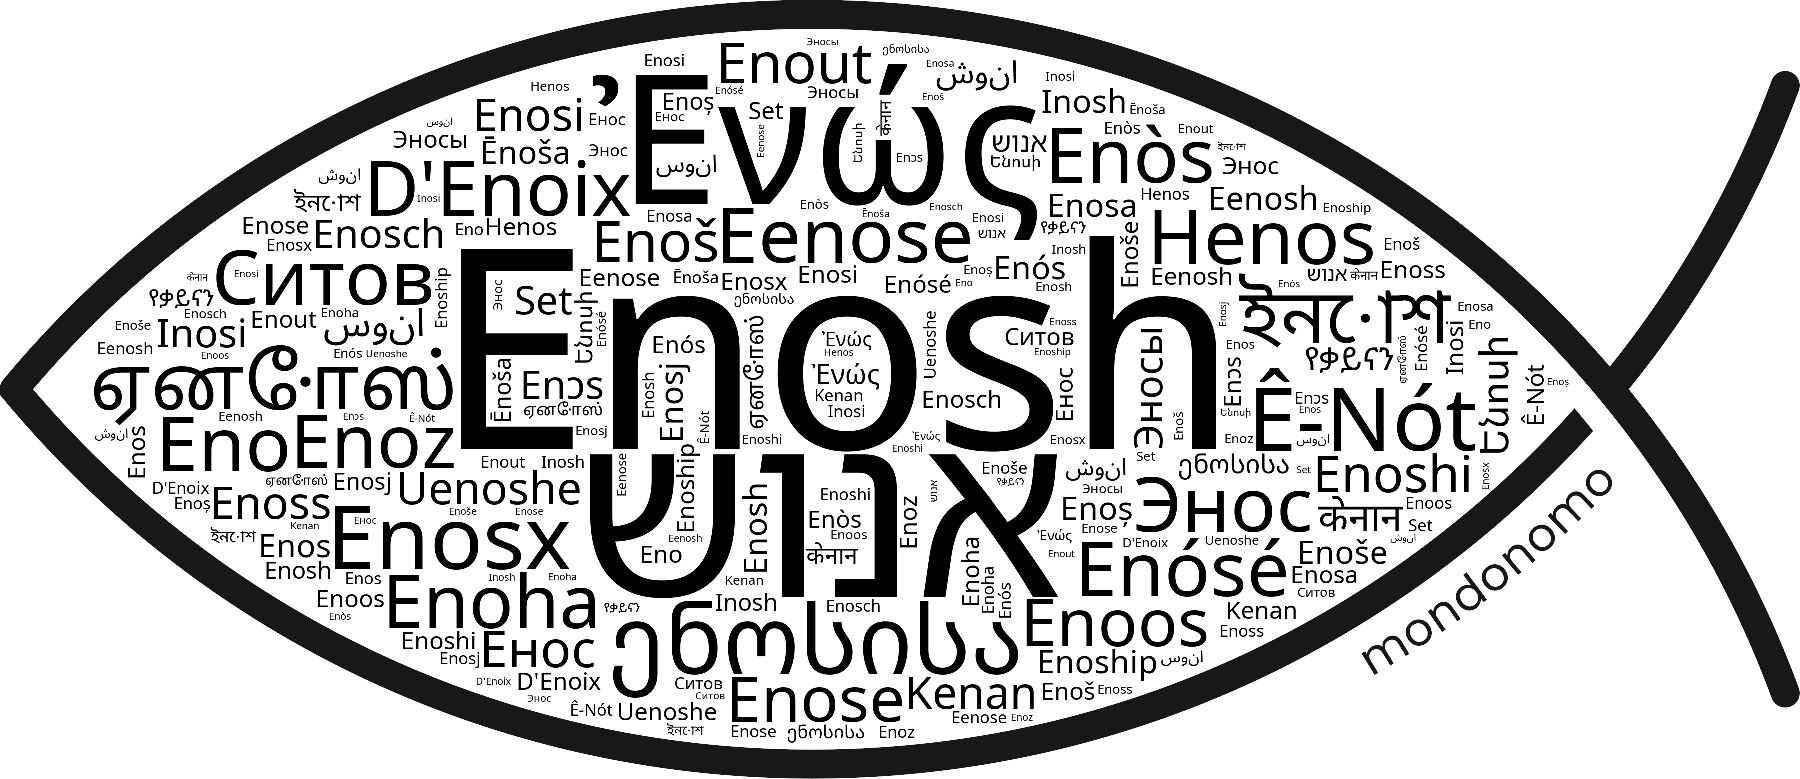 Name Enosh in the world's Bibles